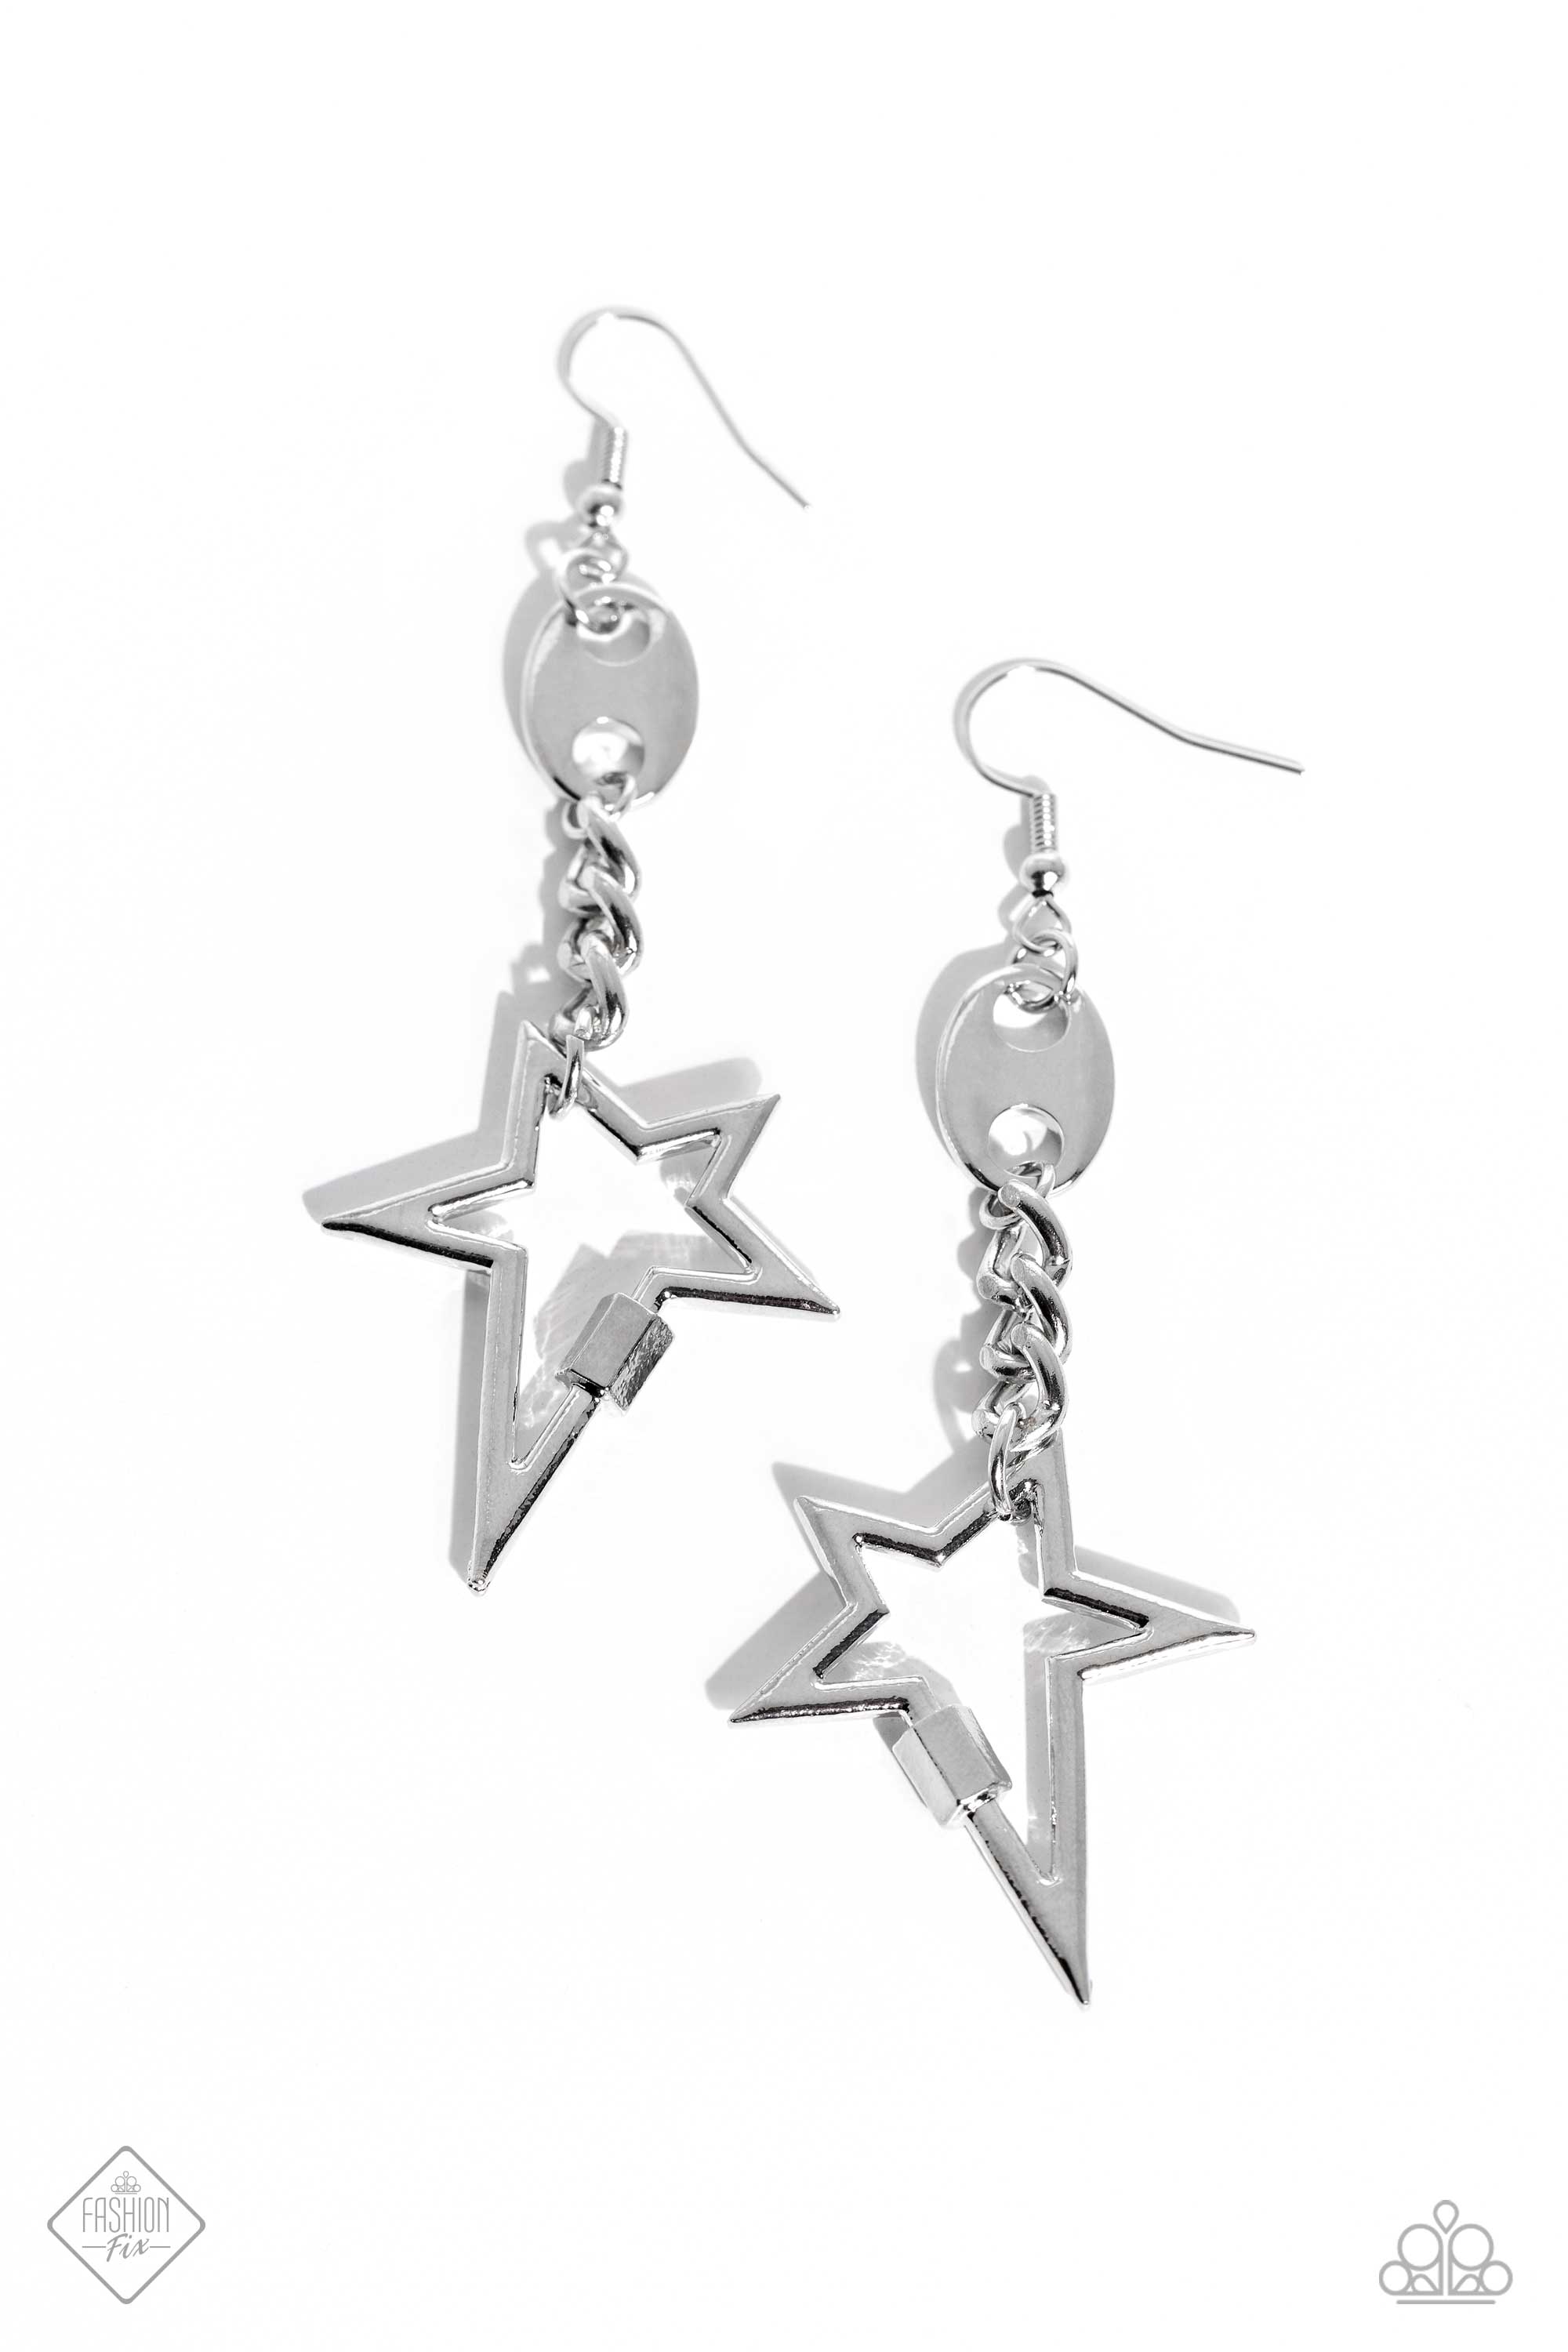 Paparazzi Incredibly Iconic Silver Post Earrings